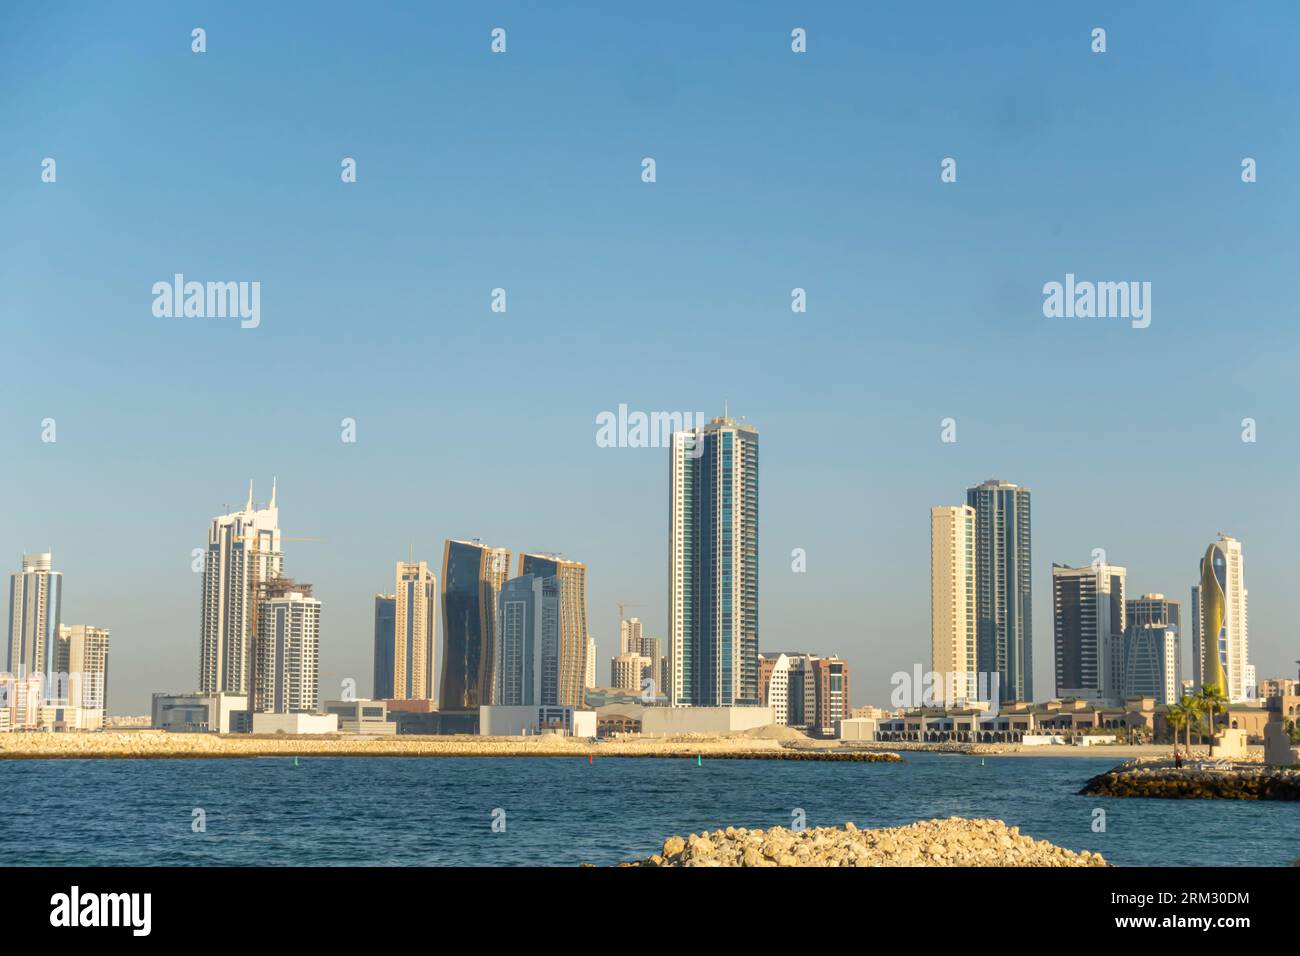 Bahrain Bay area skyline - hotels, buildings, skyscrapers situated in the Bahrain Bay Stock Photo